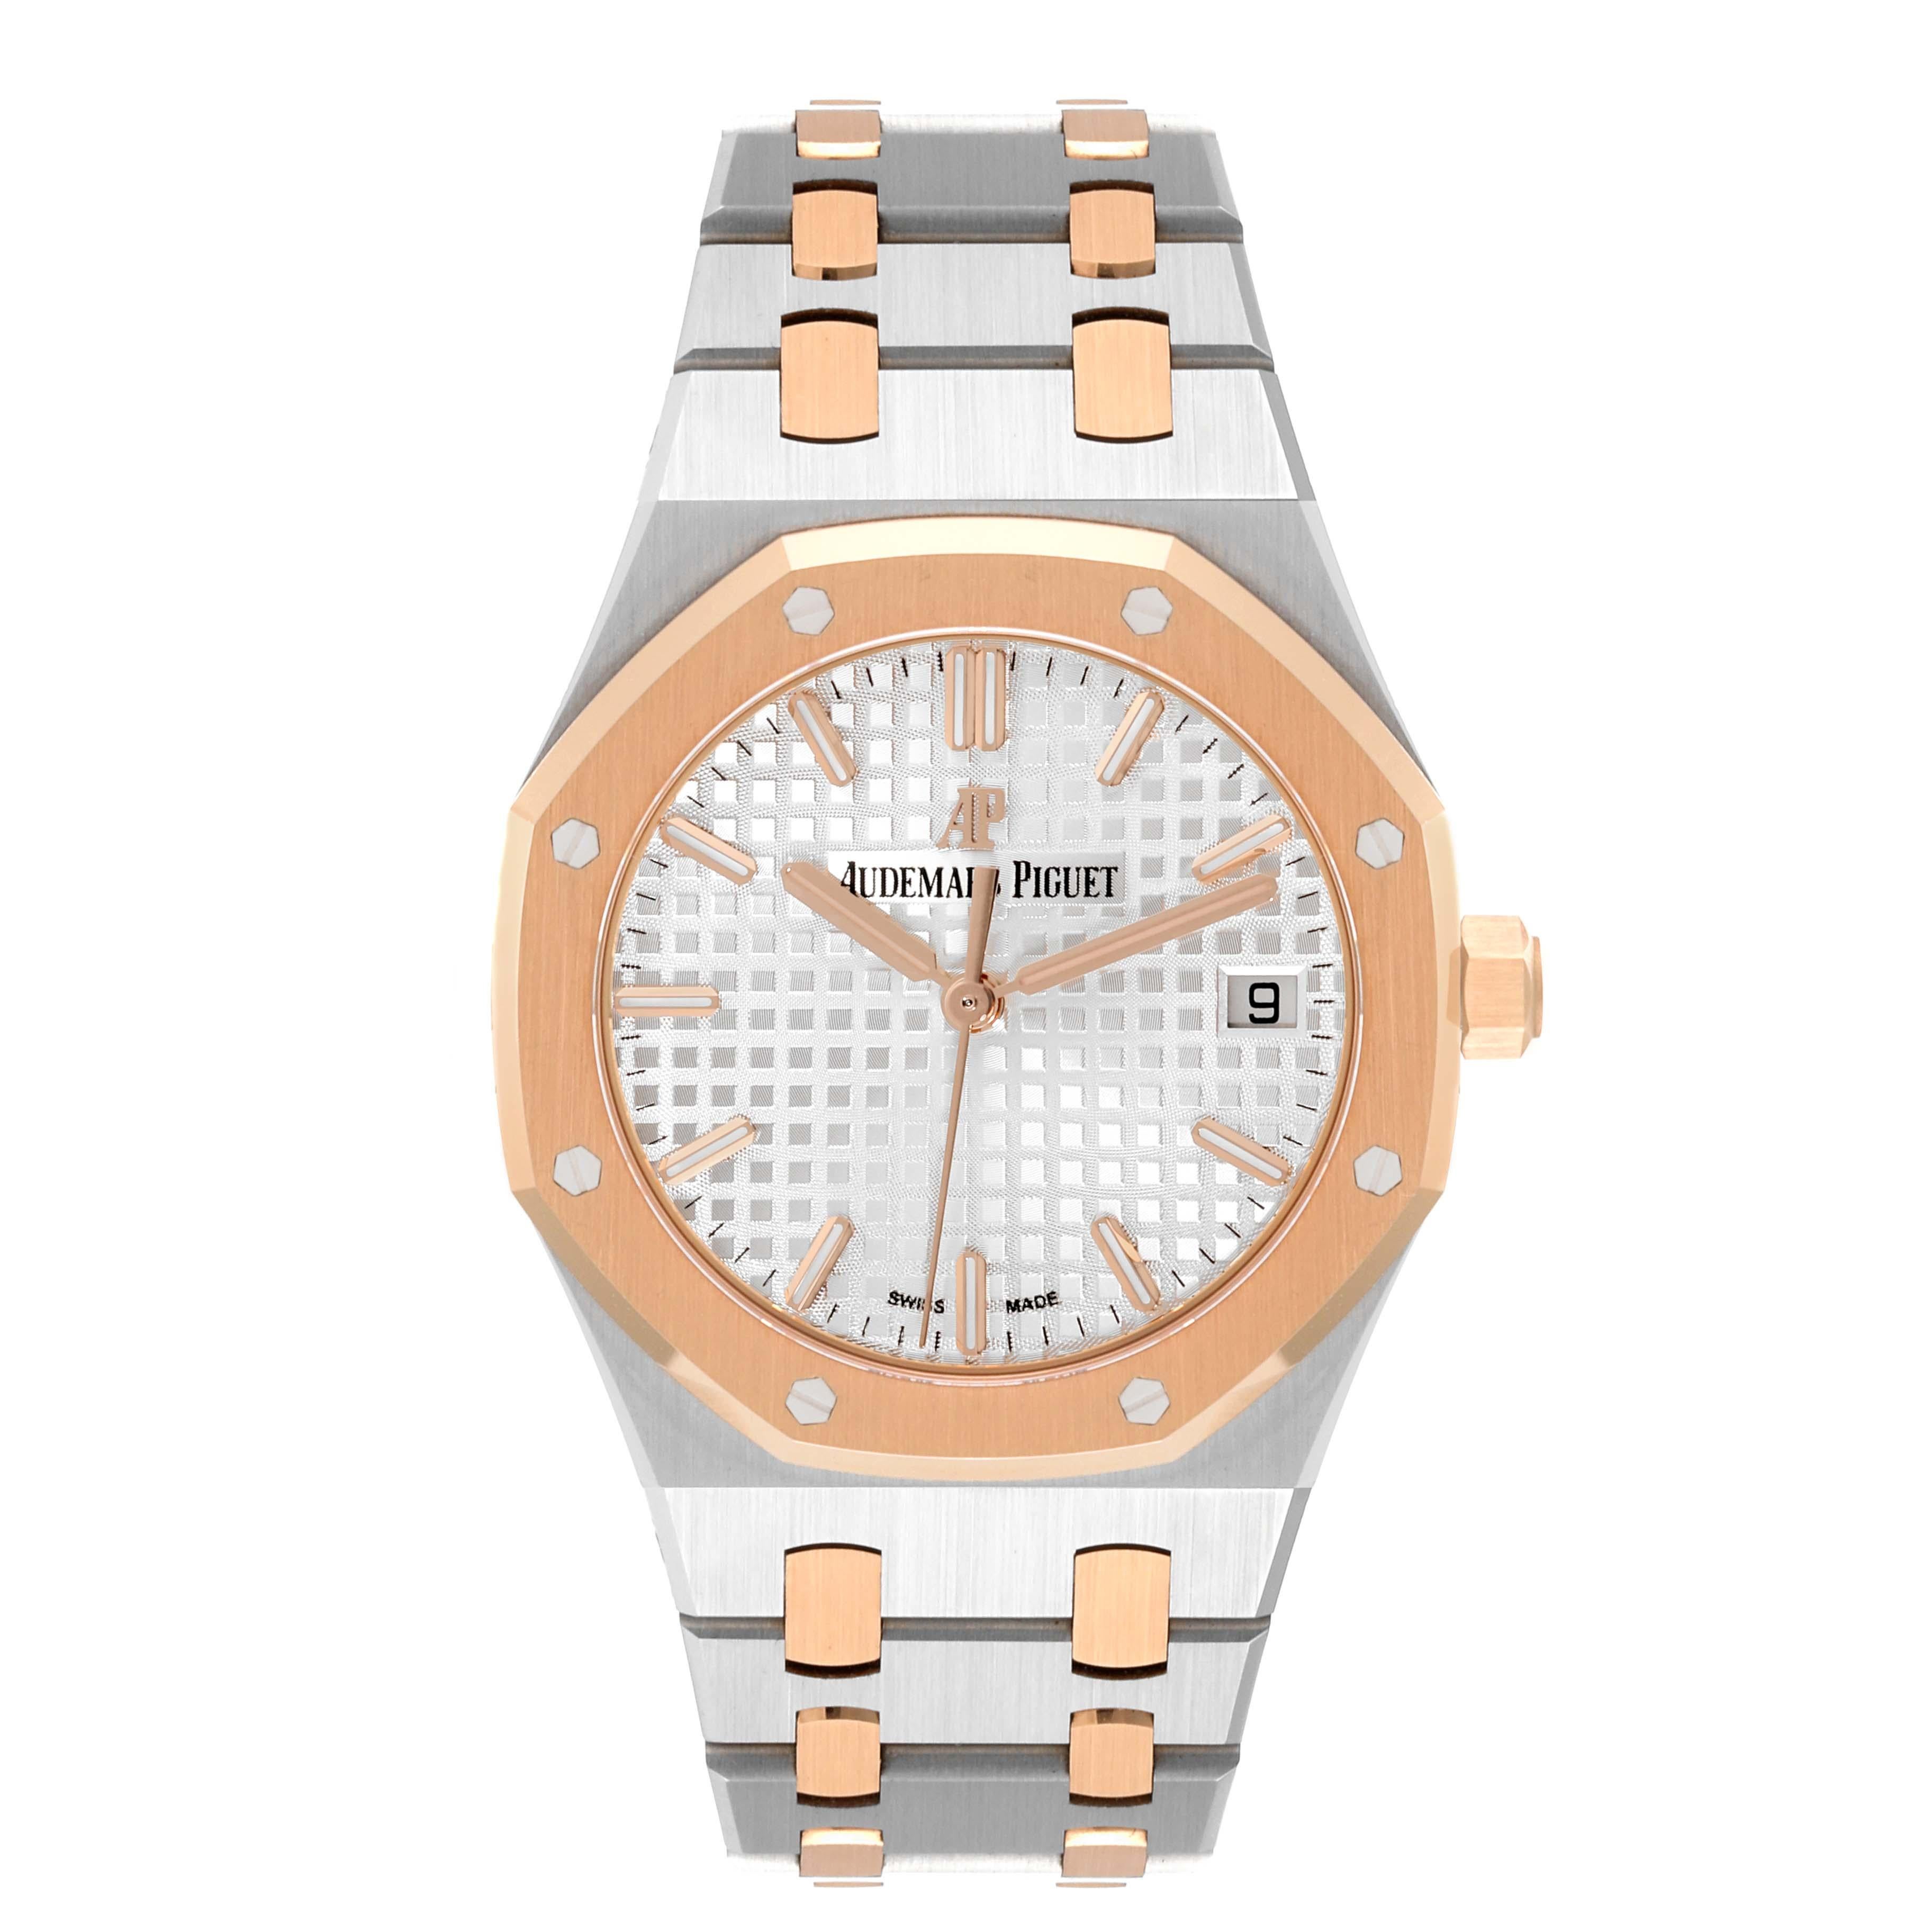 Audemars Piguet Royal Oak Steel Rose Gold Mens Watch 77350SR Card. Automatic self-winding movement. Stainless steel case 34.0 mm in diameter. Transparent exhibition sapphire crystal caseback. 18K rose gold bezel punctuated with 8 signature screws.